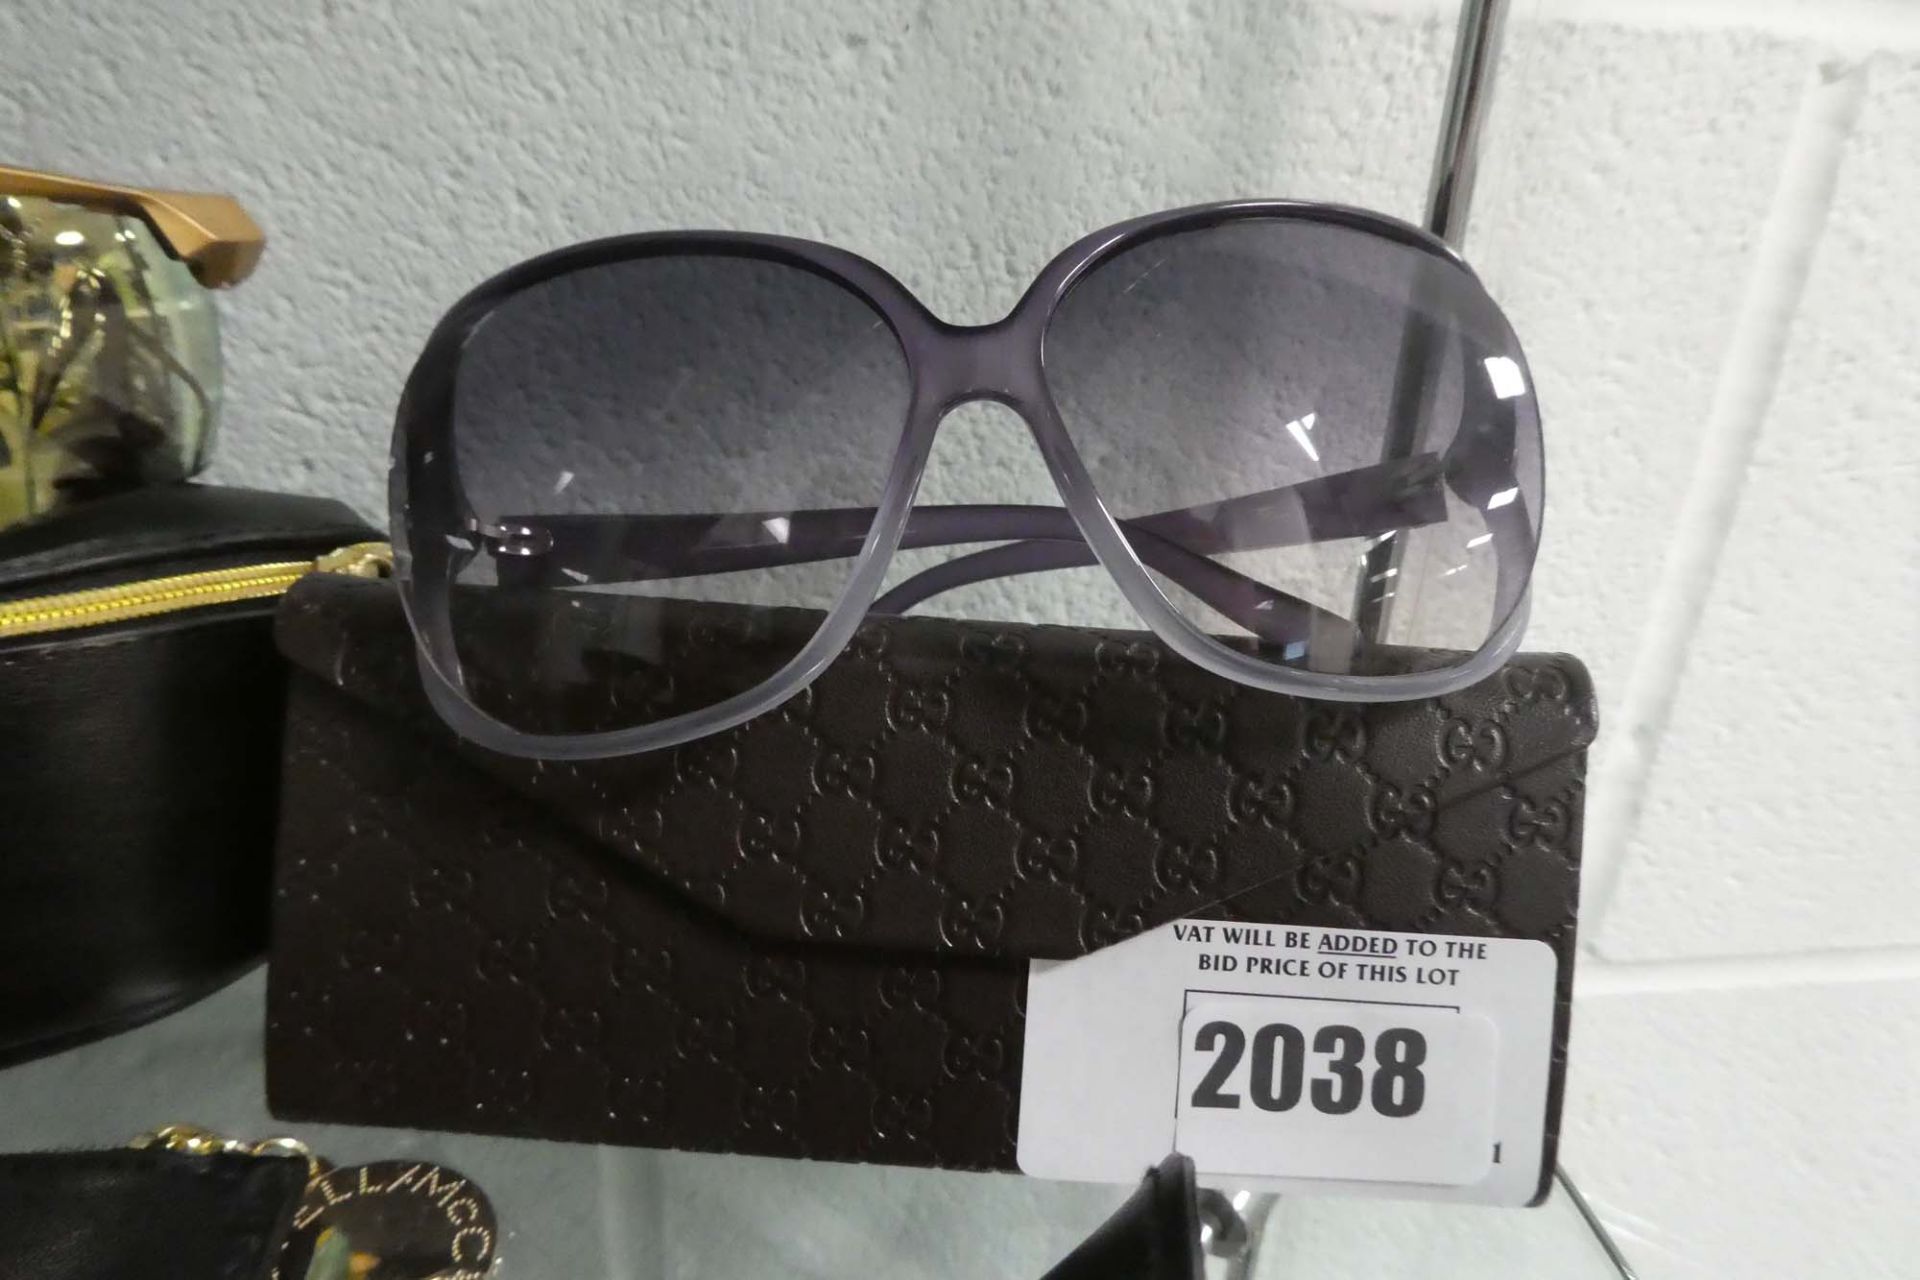 Pair of ladies Gucci sunglasses in purple frames with case, GG0506S